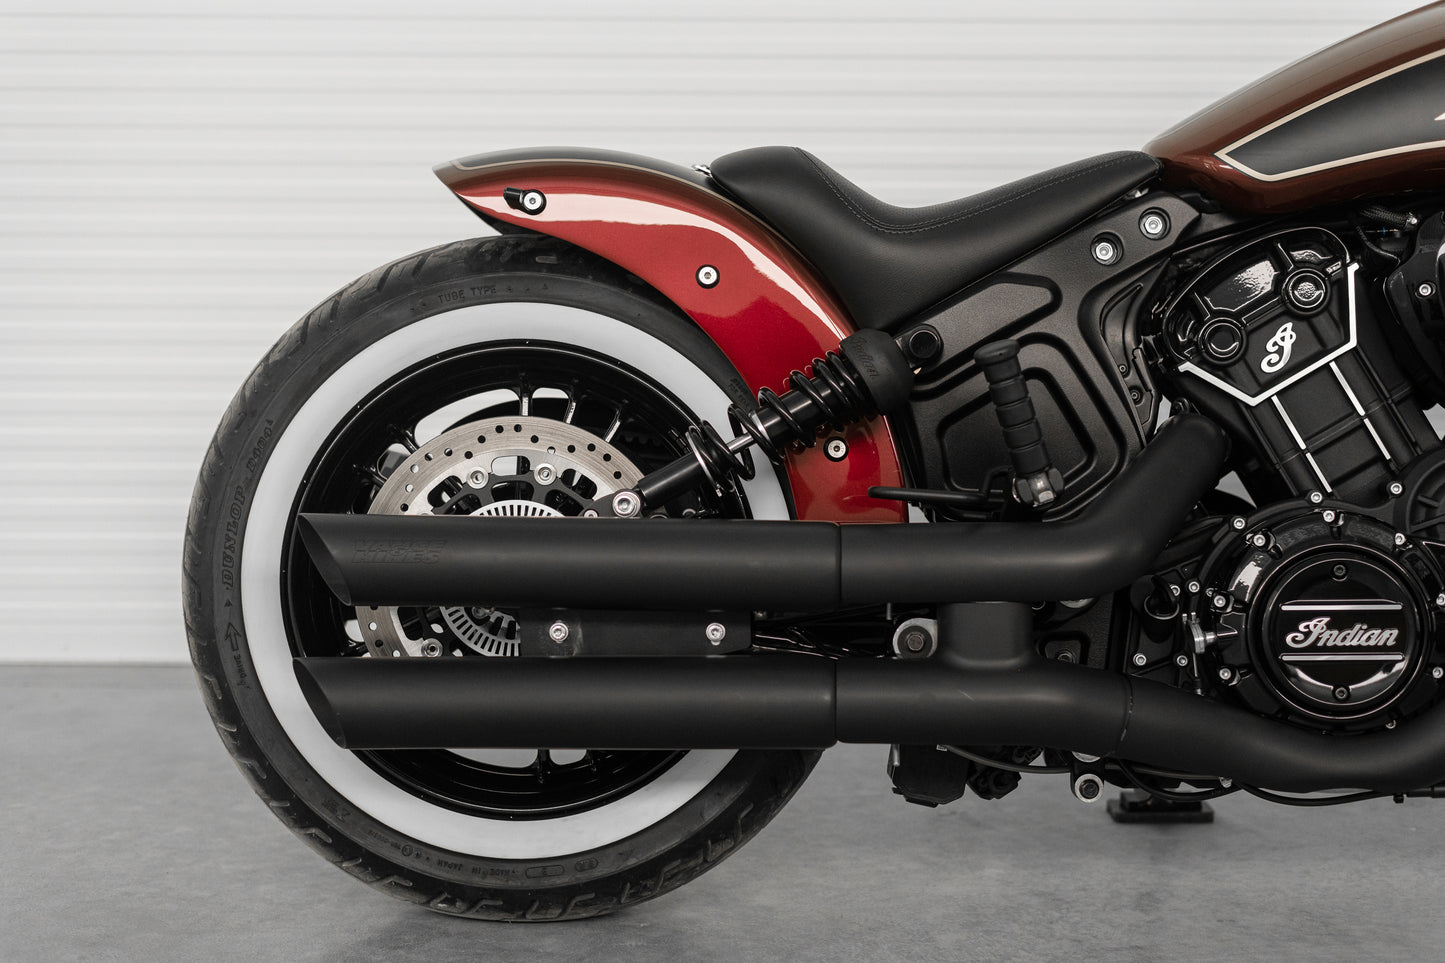 Harley Davidson motorcycle with Killer Custom  rear shock lowering kit from the side neutral background